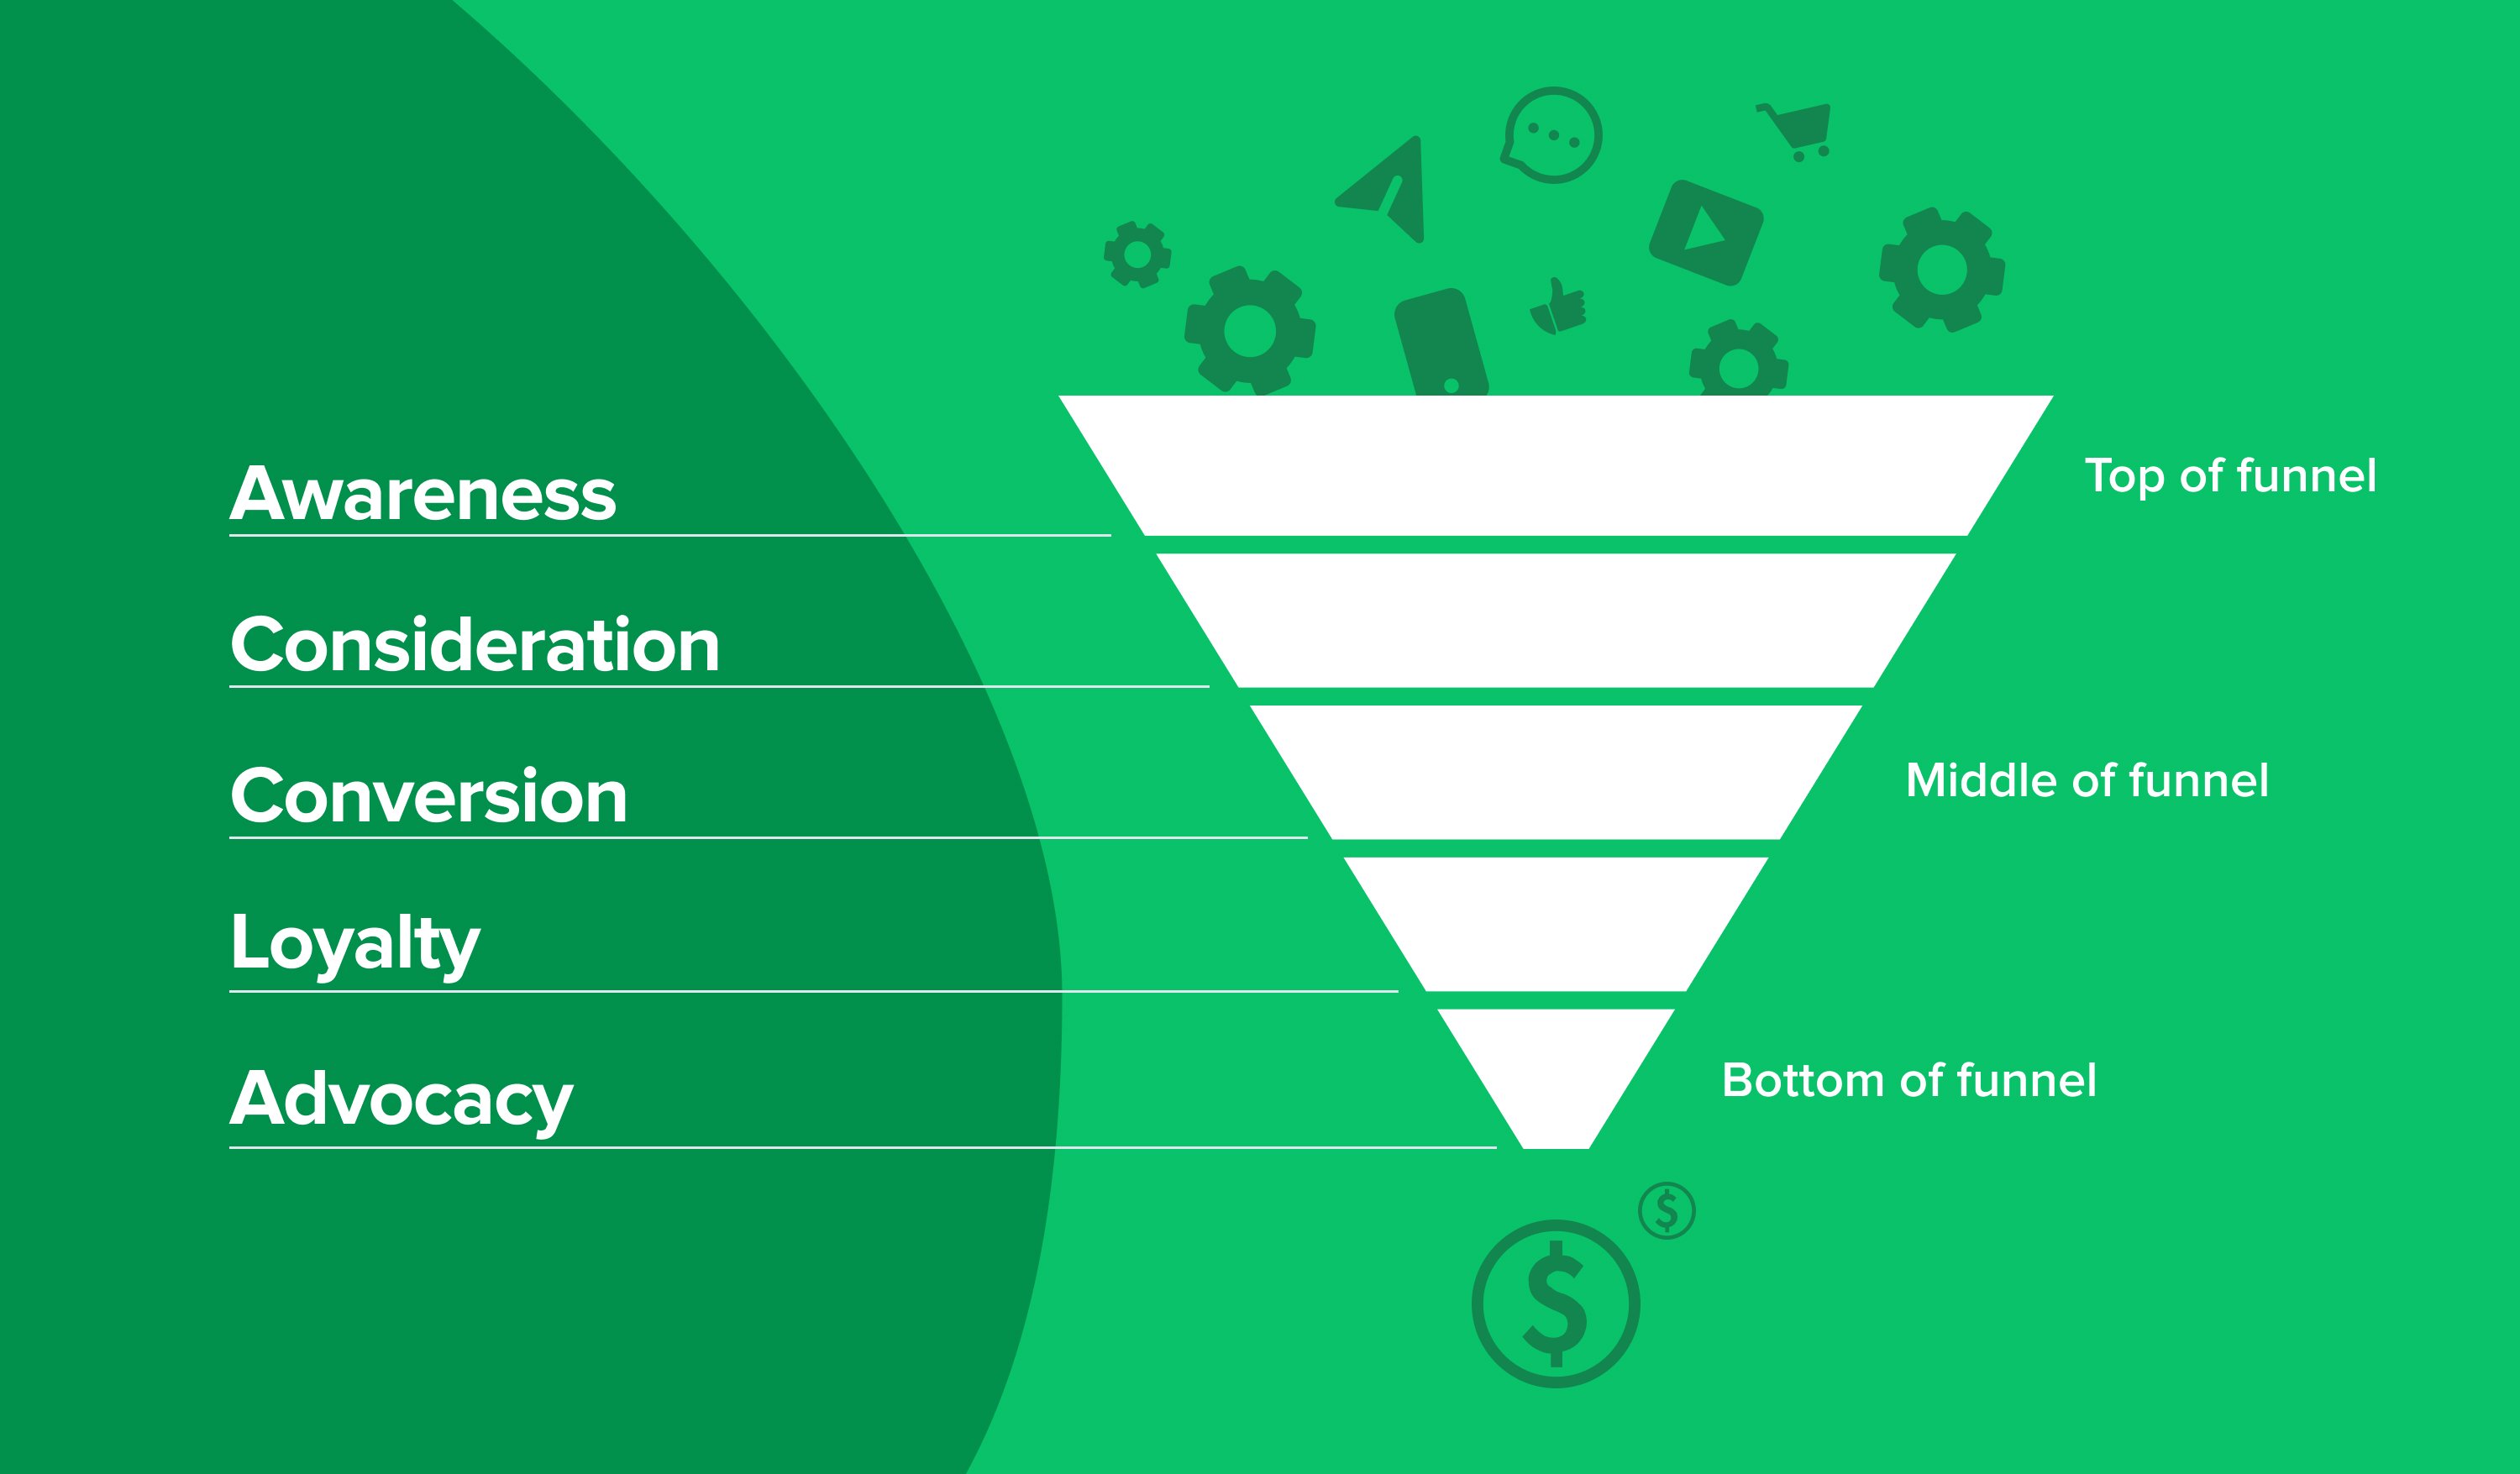 ppc paid per click advertising market funnel green background - mailerlite